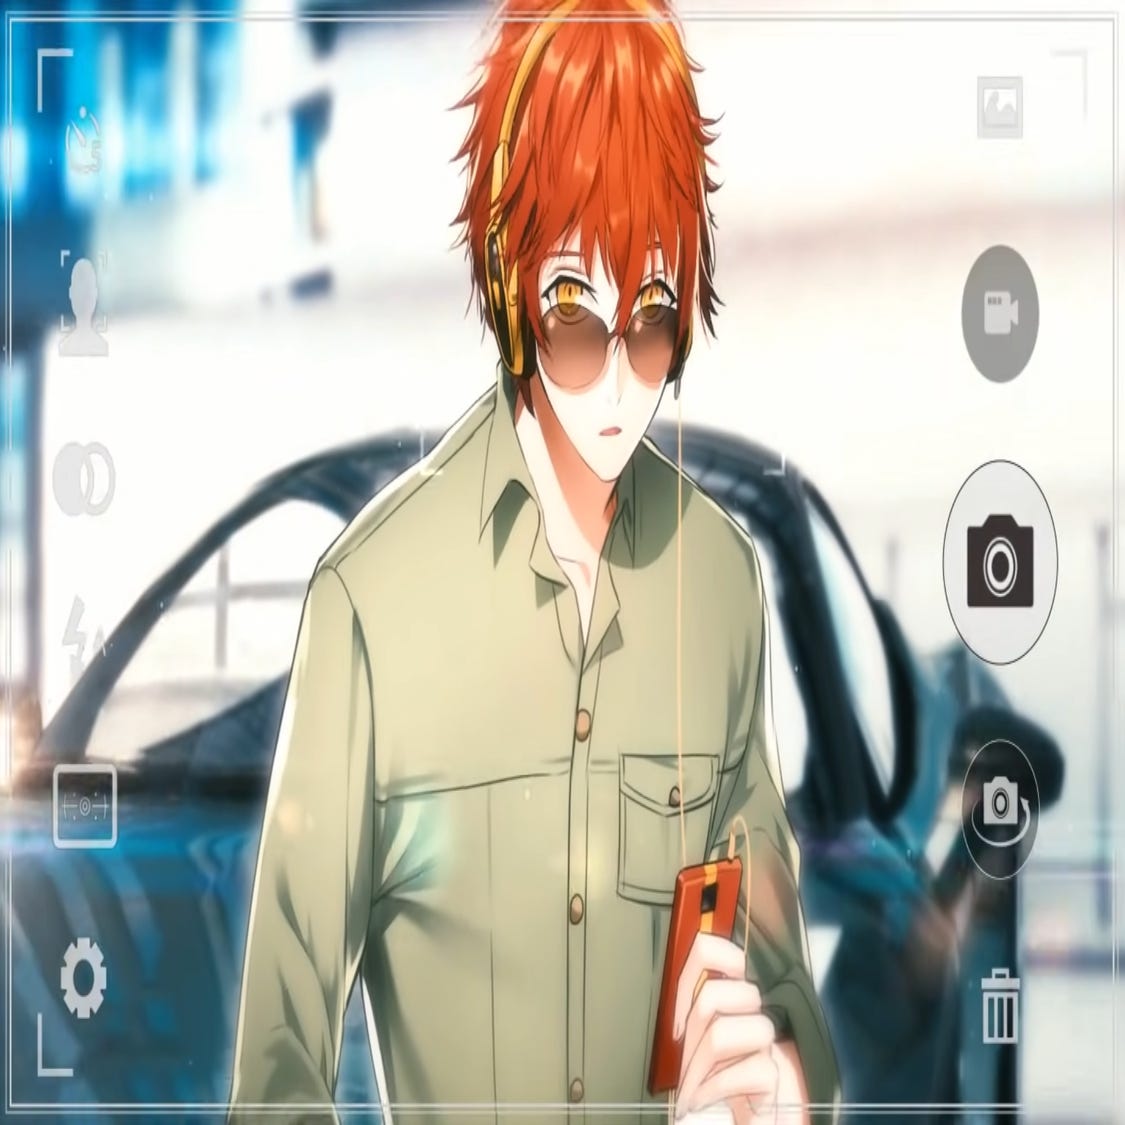 mystic-messenger-707-route-walkthrough-and-endings-guide-day-5-6-7-8-9-10-and-11-deep